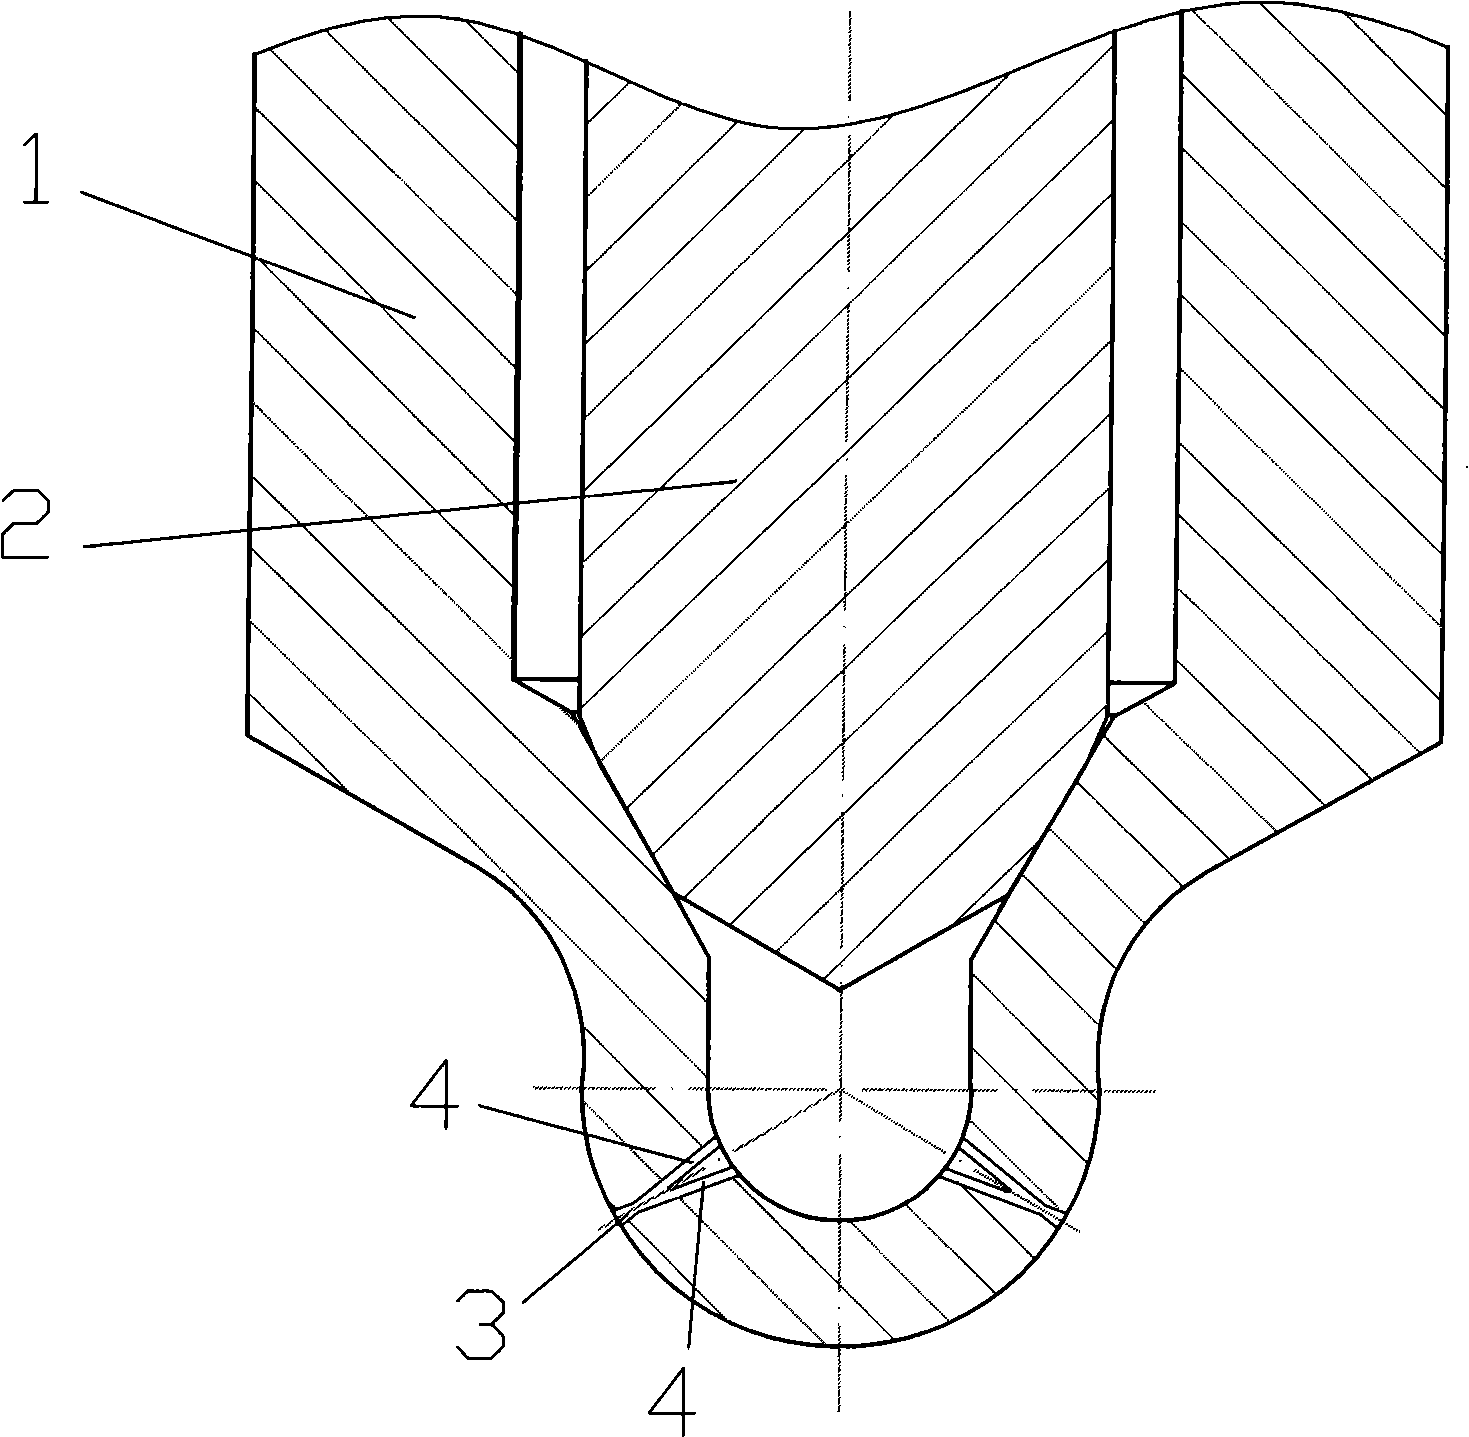 Crossing spray orifice type injection nozzle of internal combustion engine